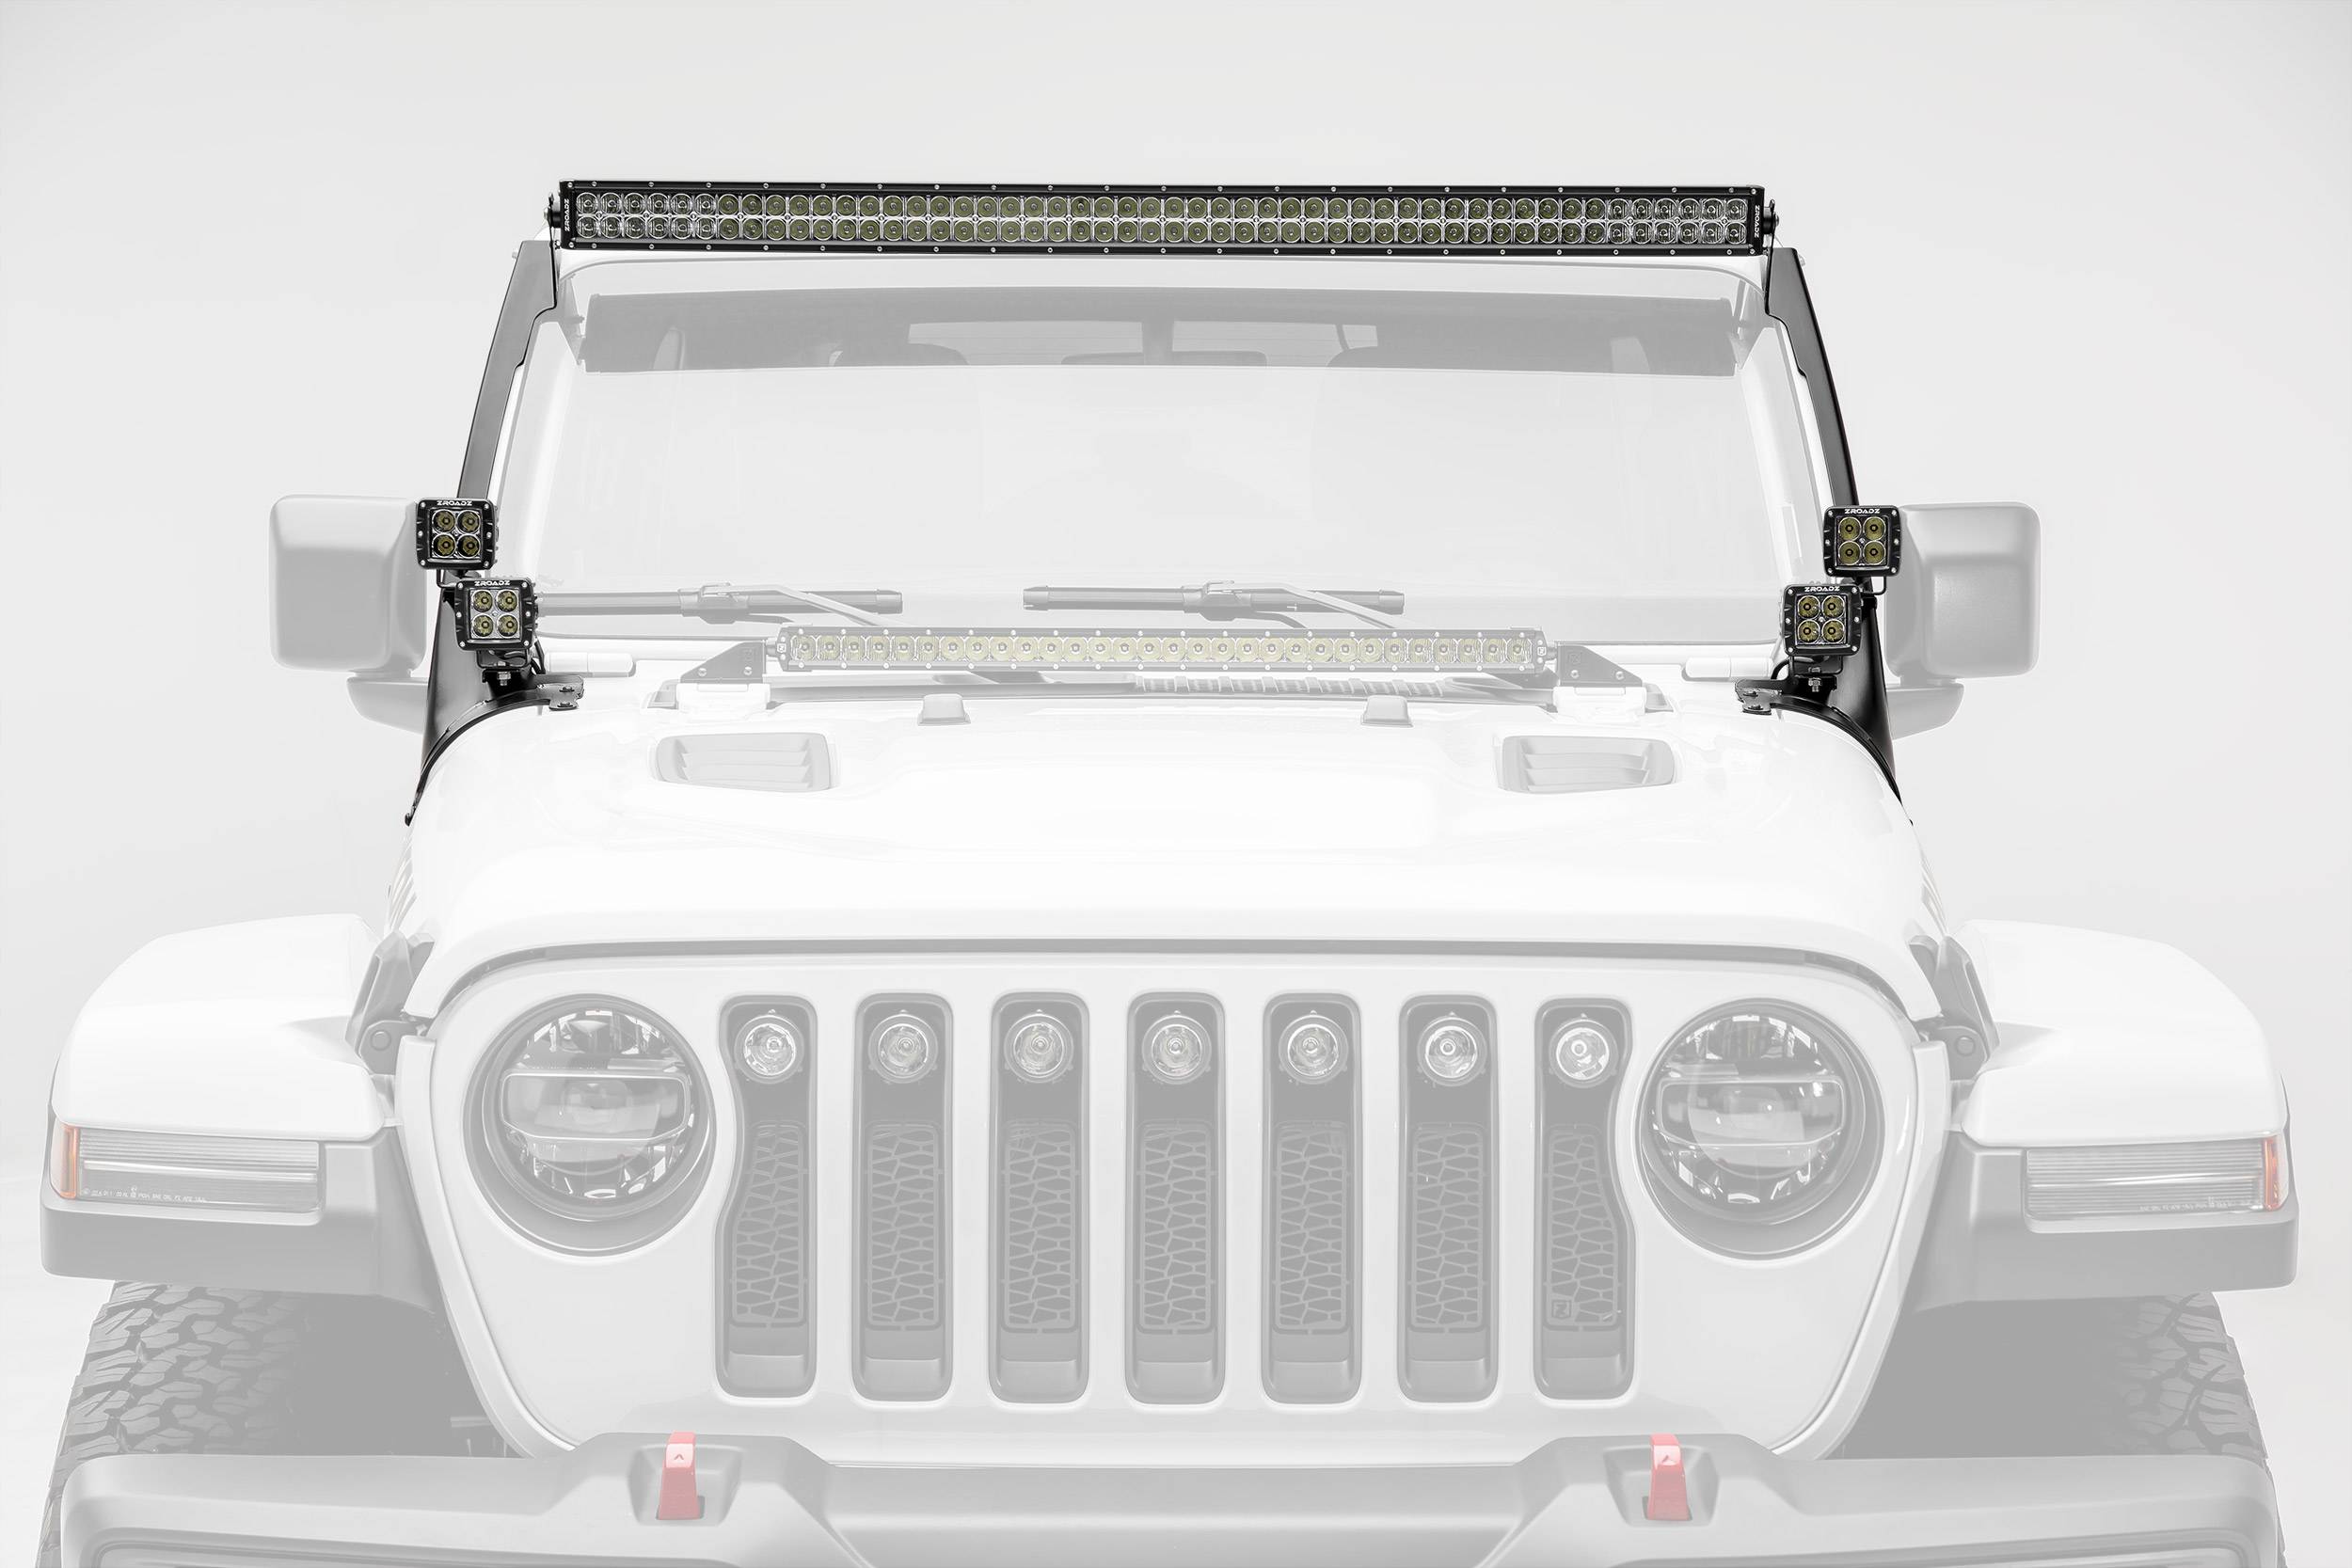 Jeep JL, Gladiator Front Roof LED Bracket to mount (1) 50 or 52 Inch  Staight LED Light Bar and (4) Inch LED Pod Lights Part Z374831-BK4